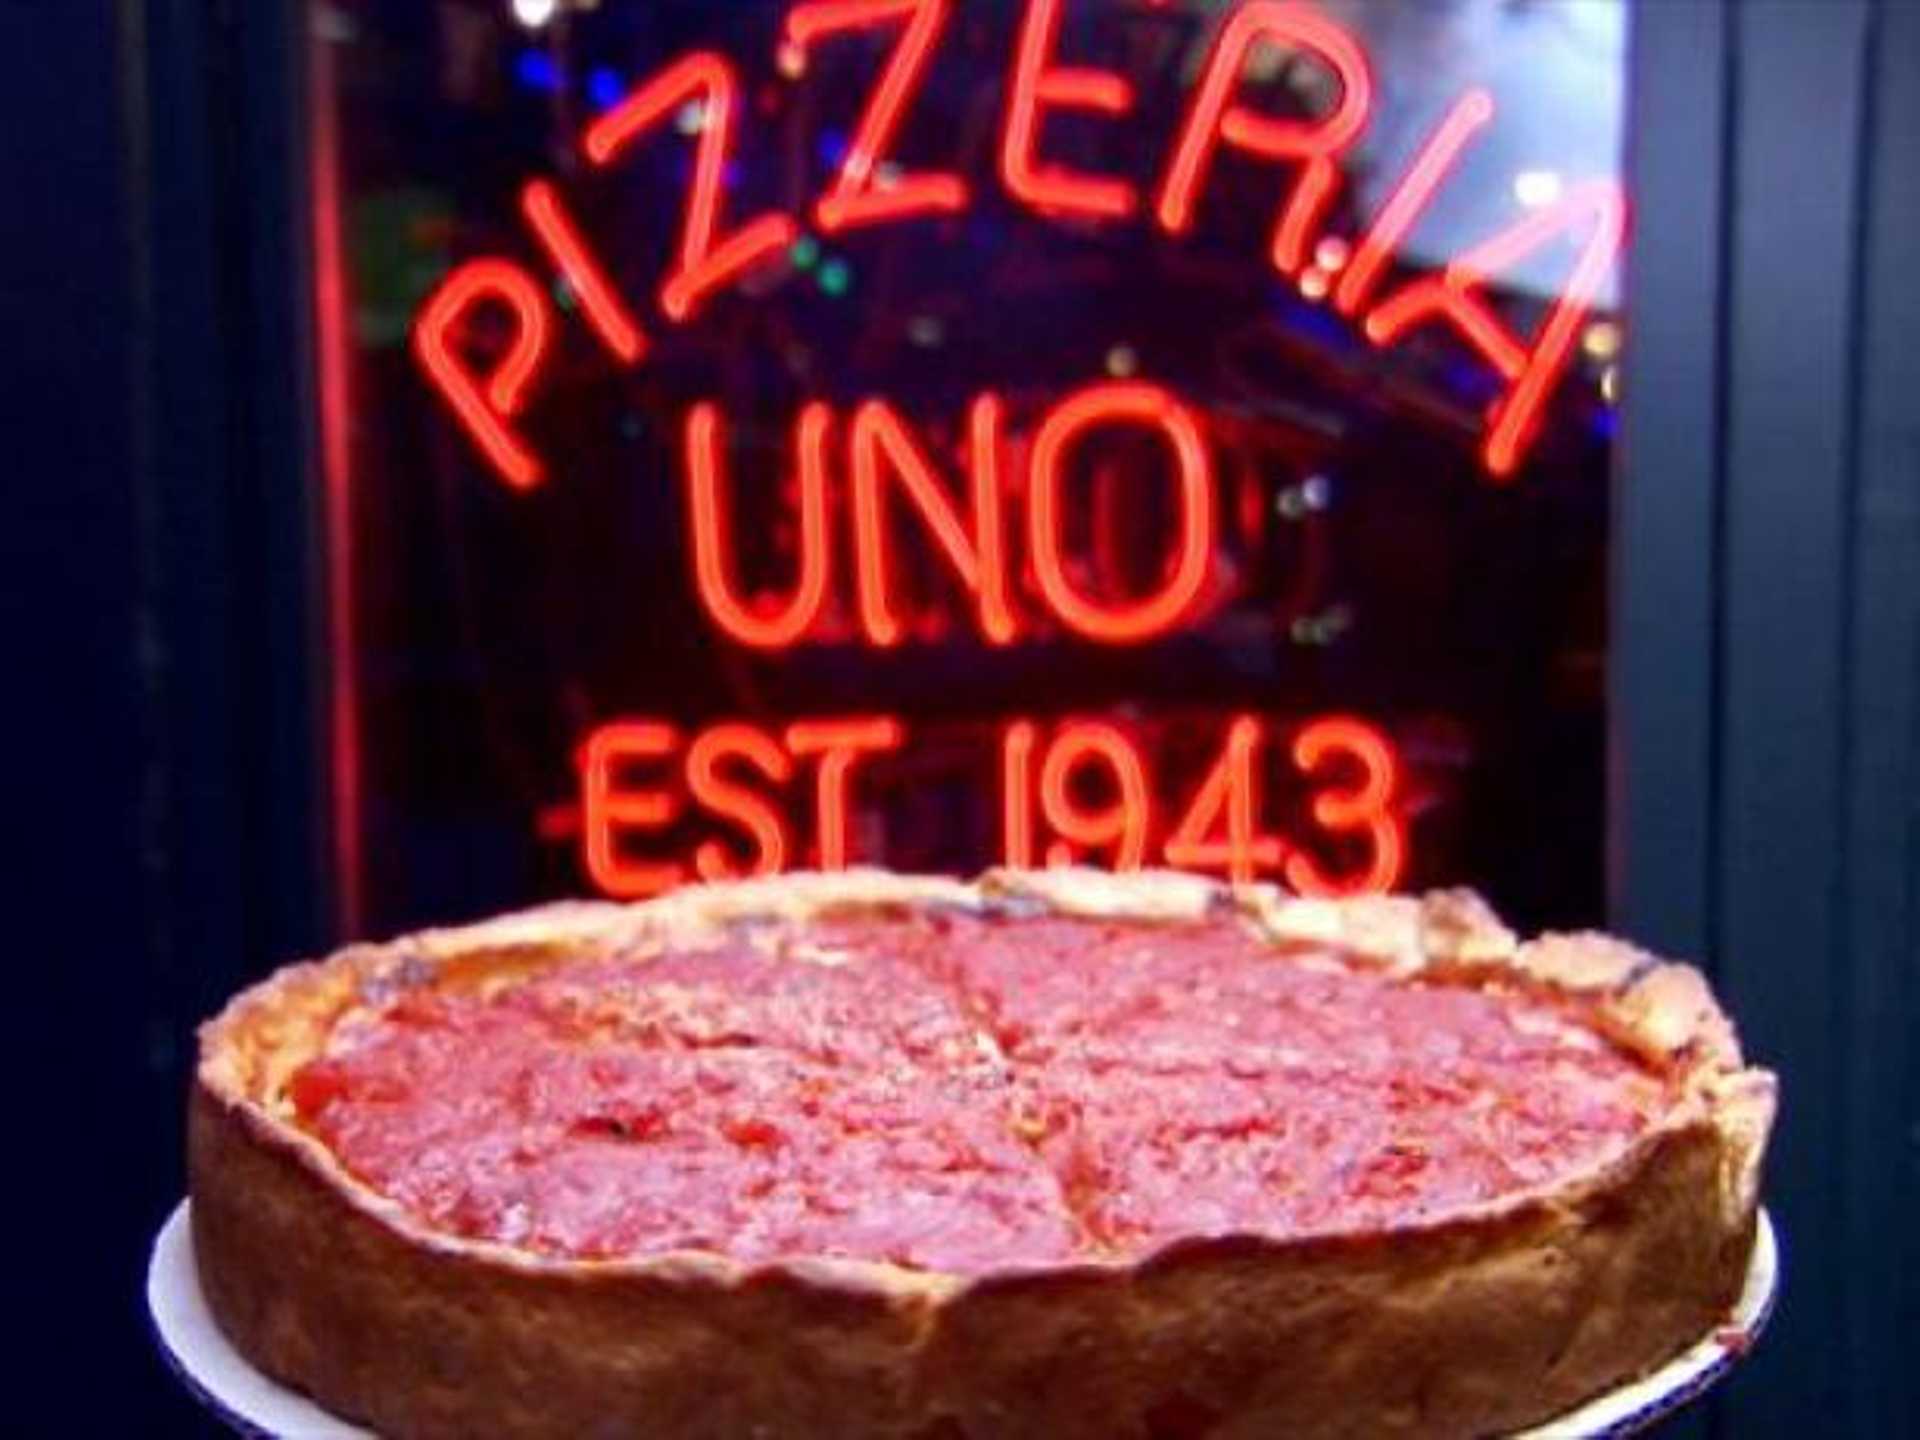 11:30am Self-Guided Deep Dish Pizza Tour